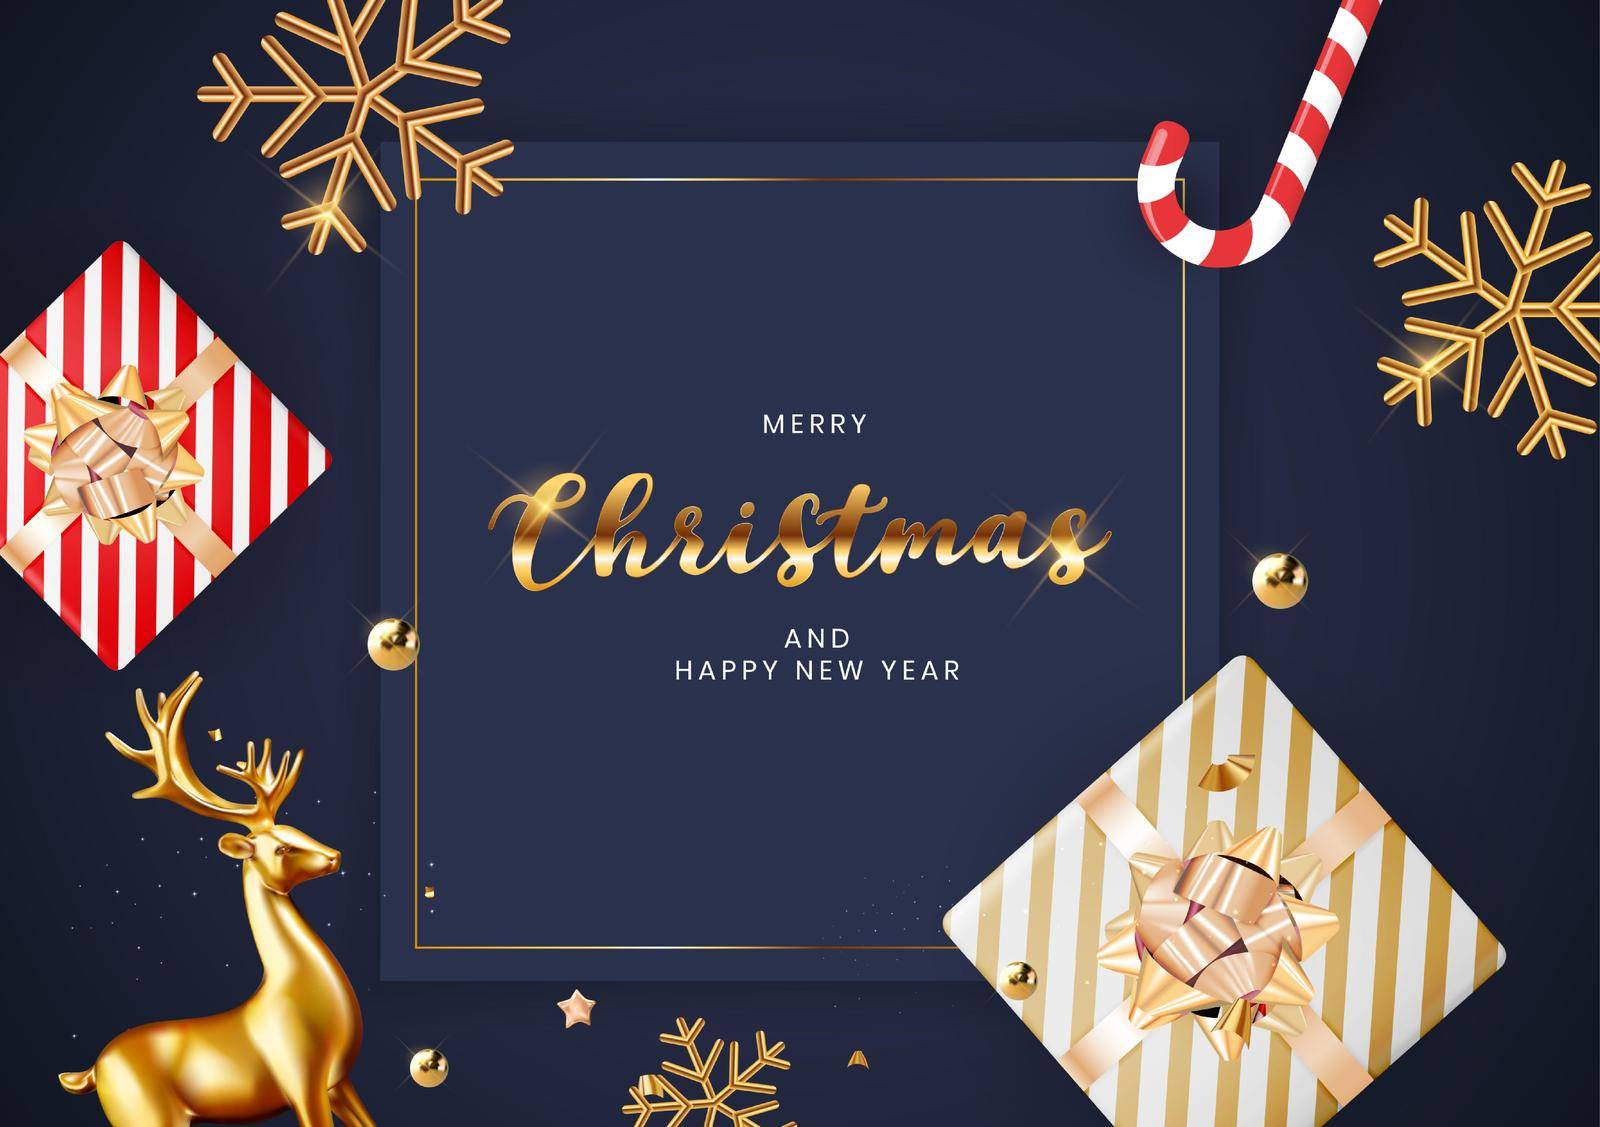 Greeting Card Merry Christmas and Happy New Year. Vector Illustration